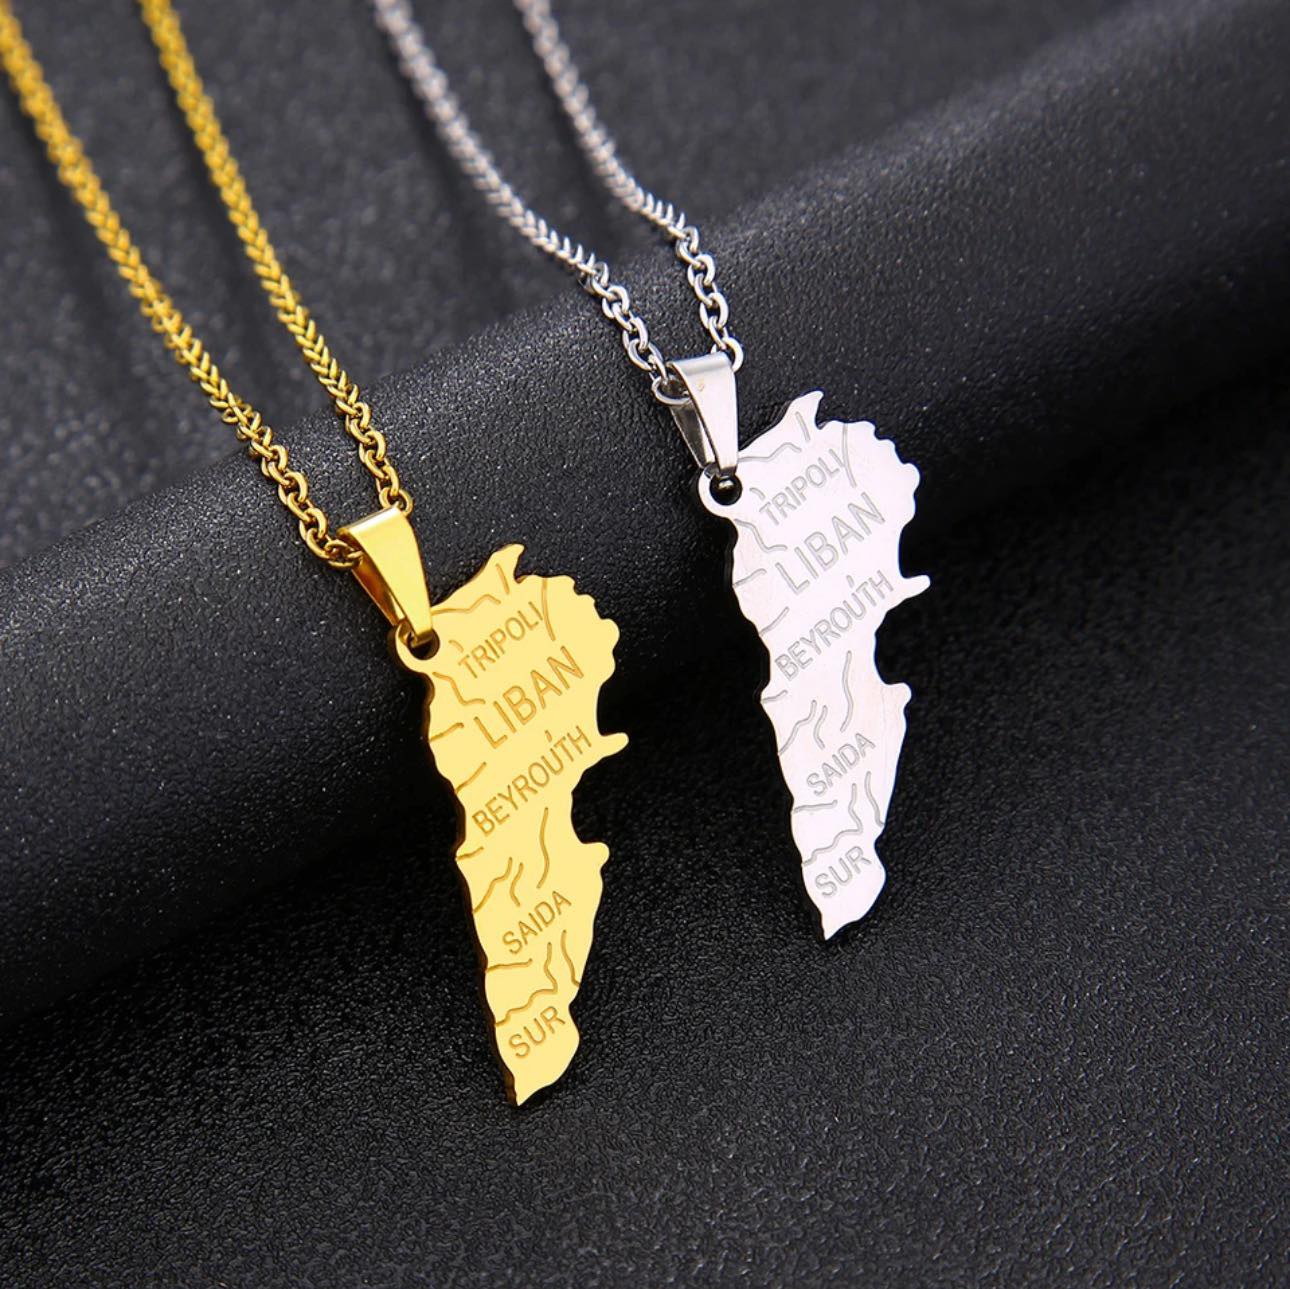 Lebanon Map & Cities Necklace